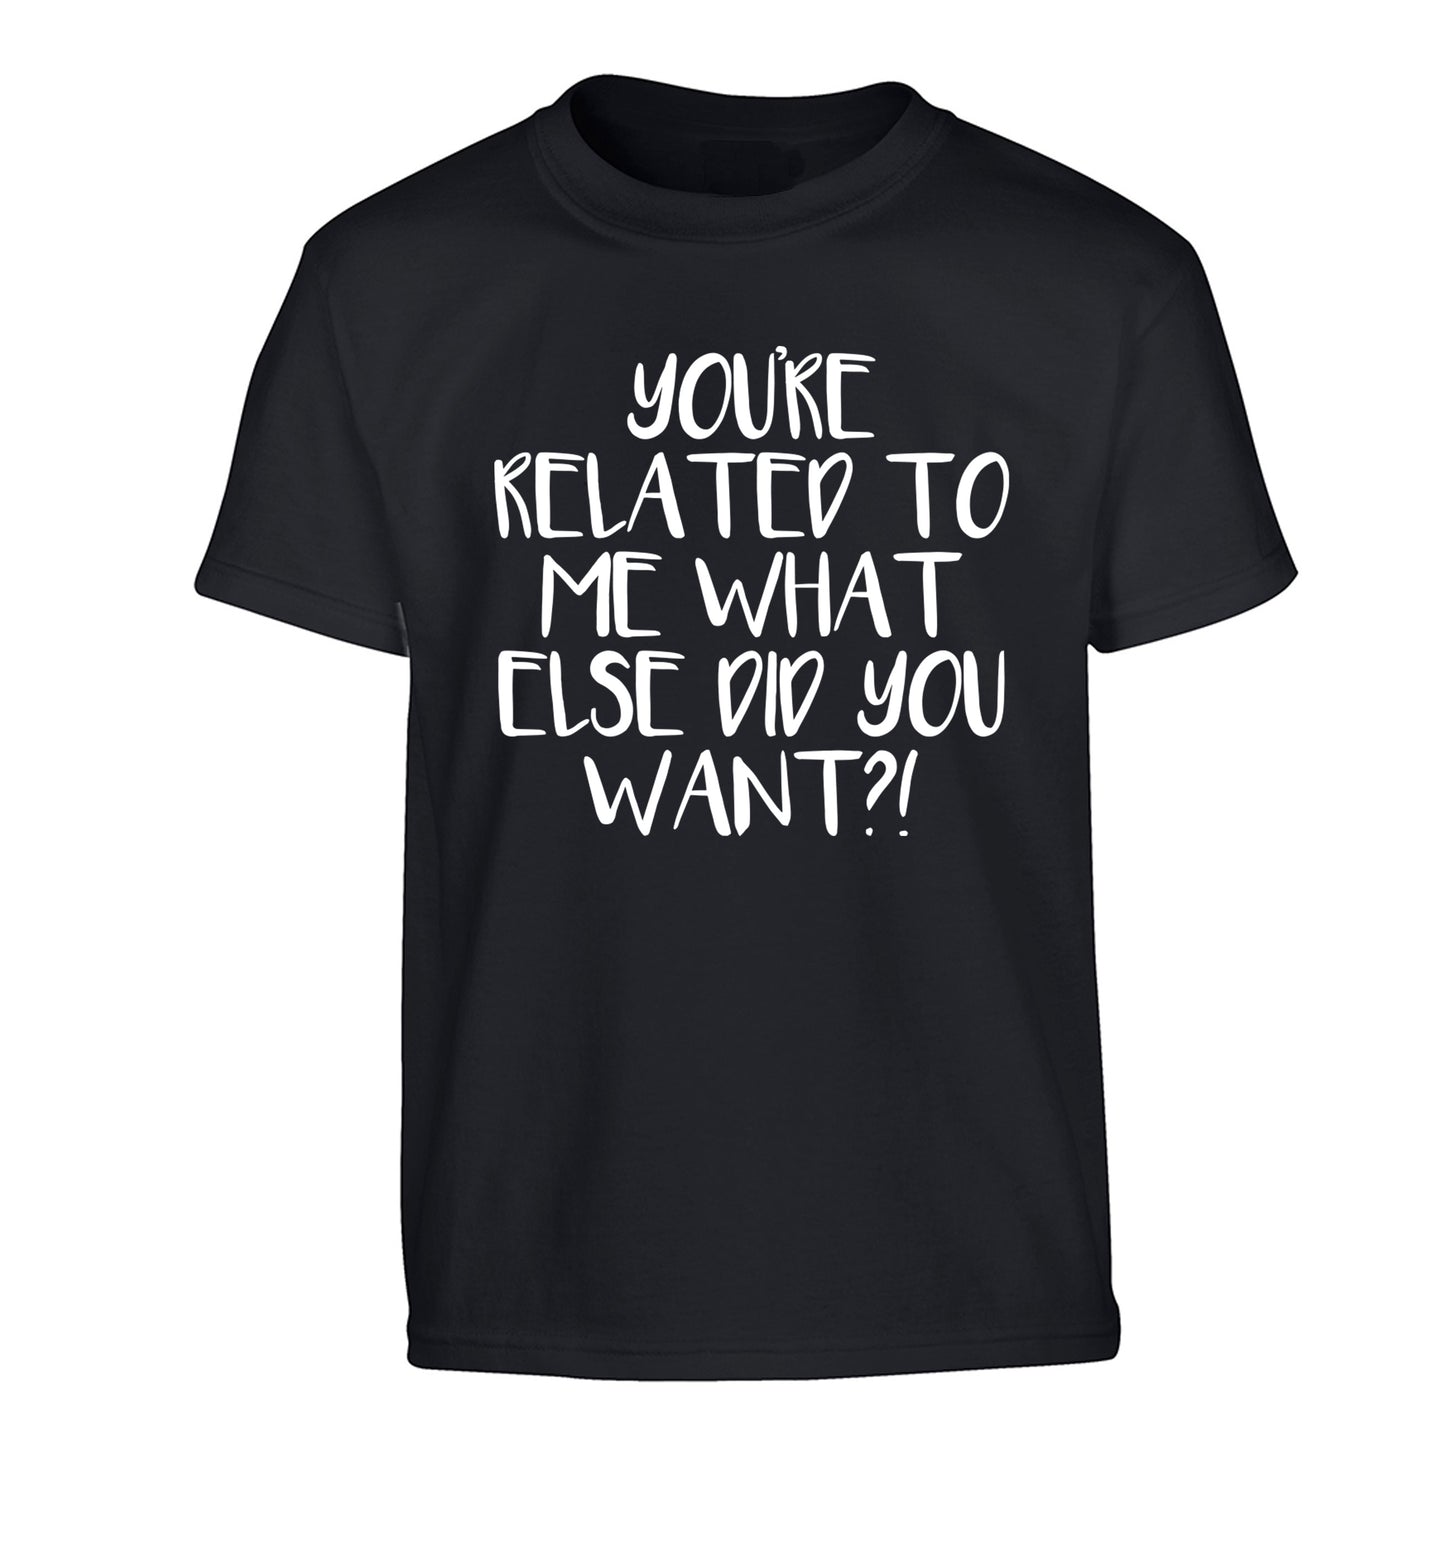 You're related to me what more do you want? Children's black Tshirt 12-13 Years